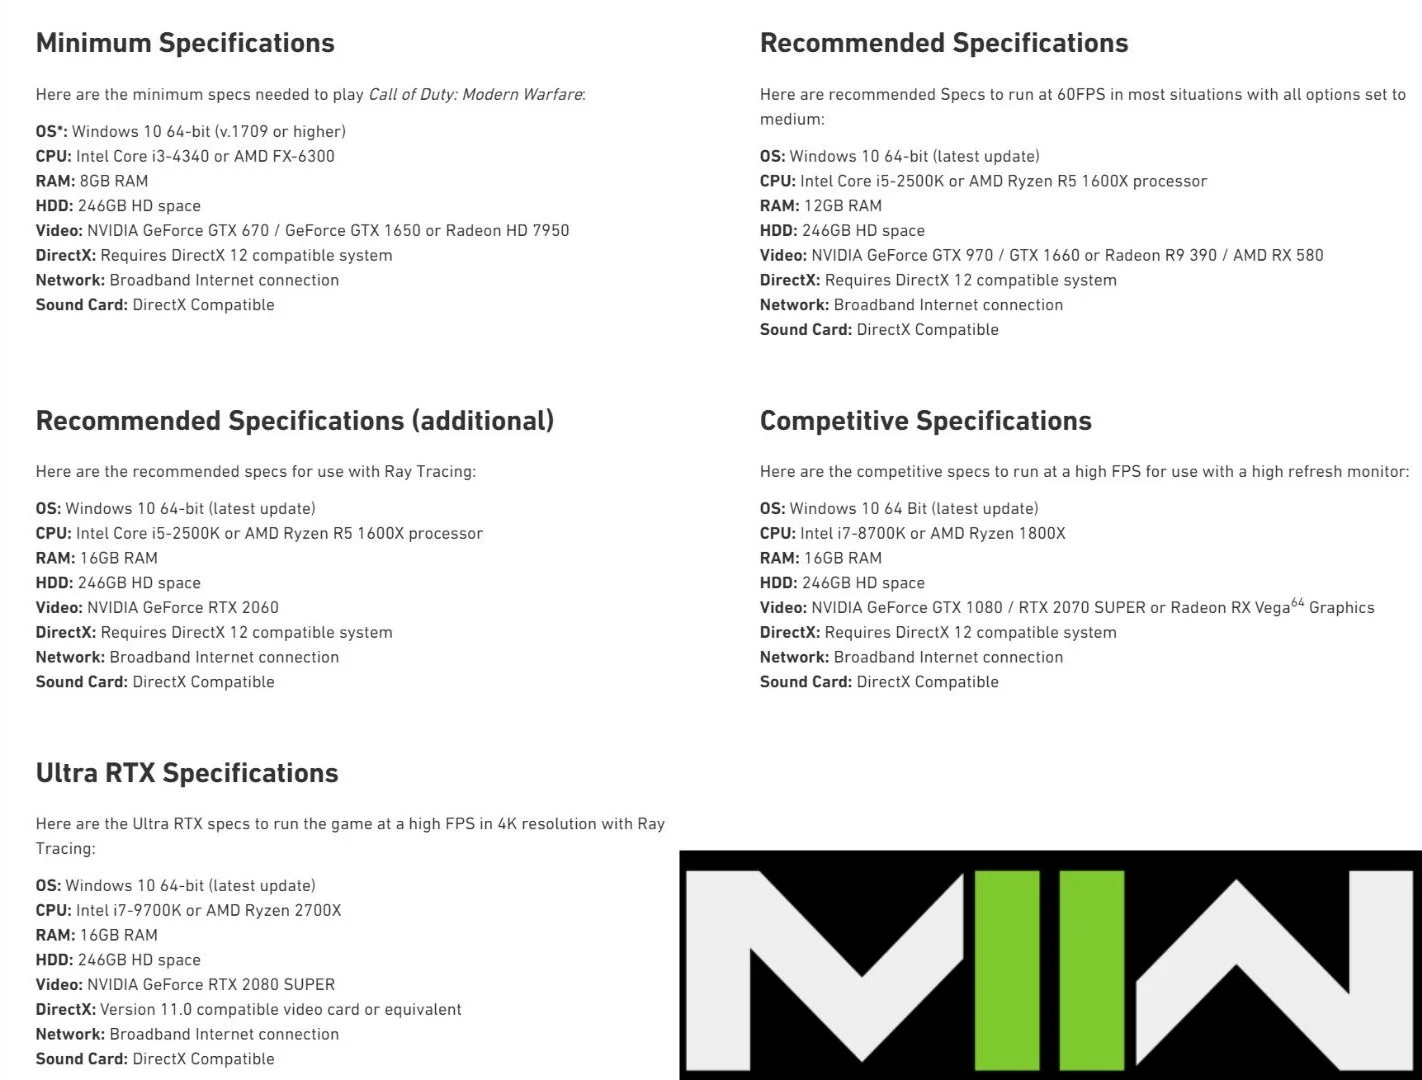 Here are the PC graphics settings for Call of Duty: Modern Warfare 2  Multiplayer